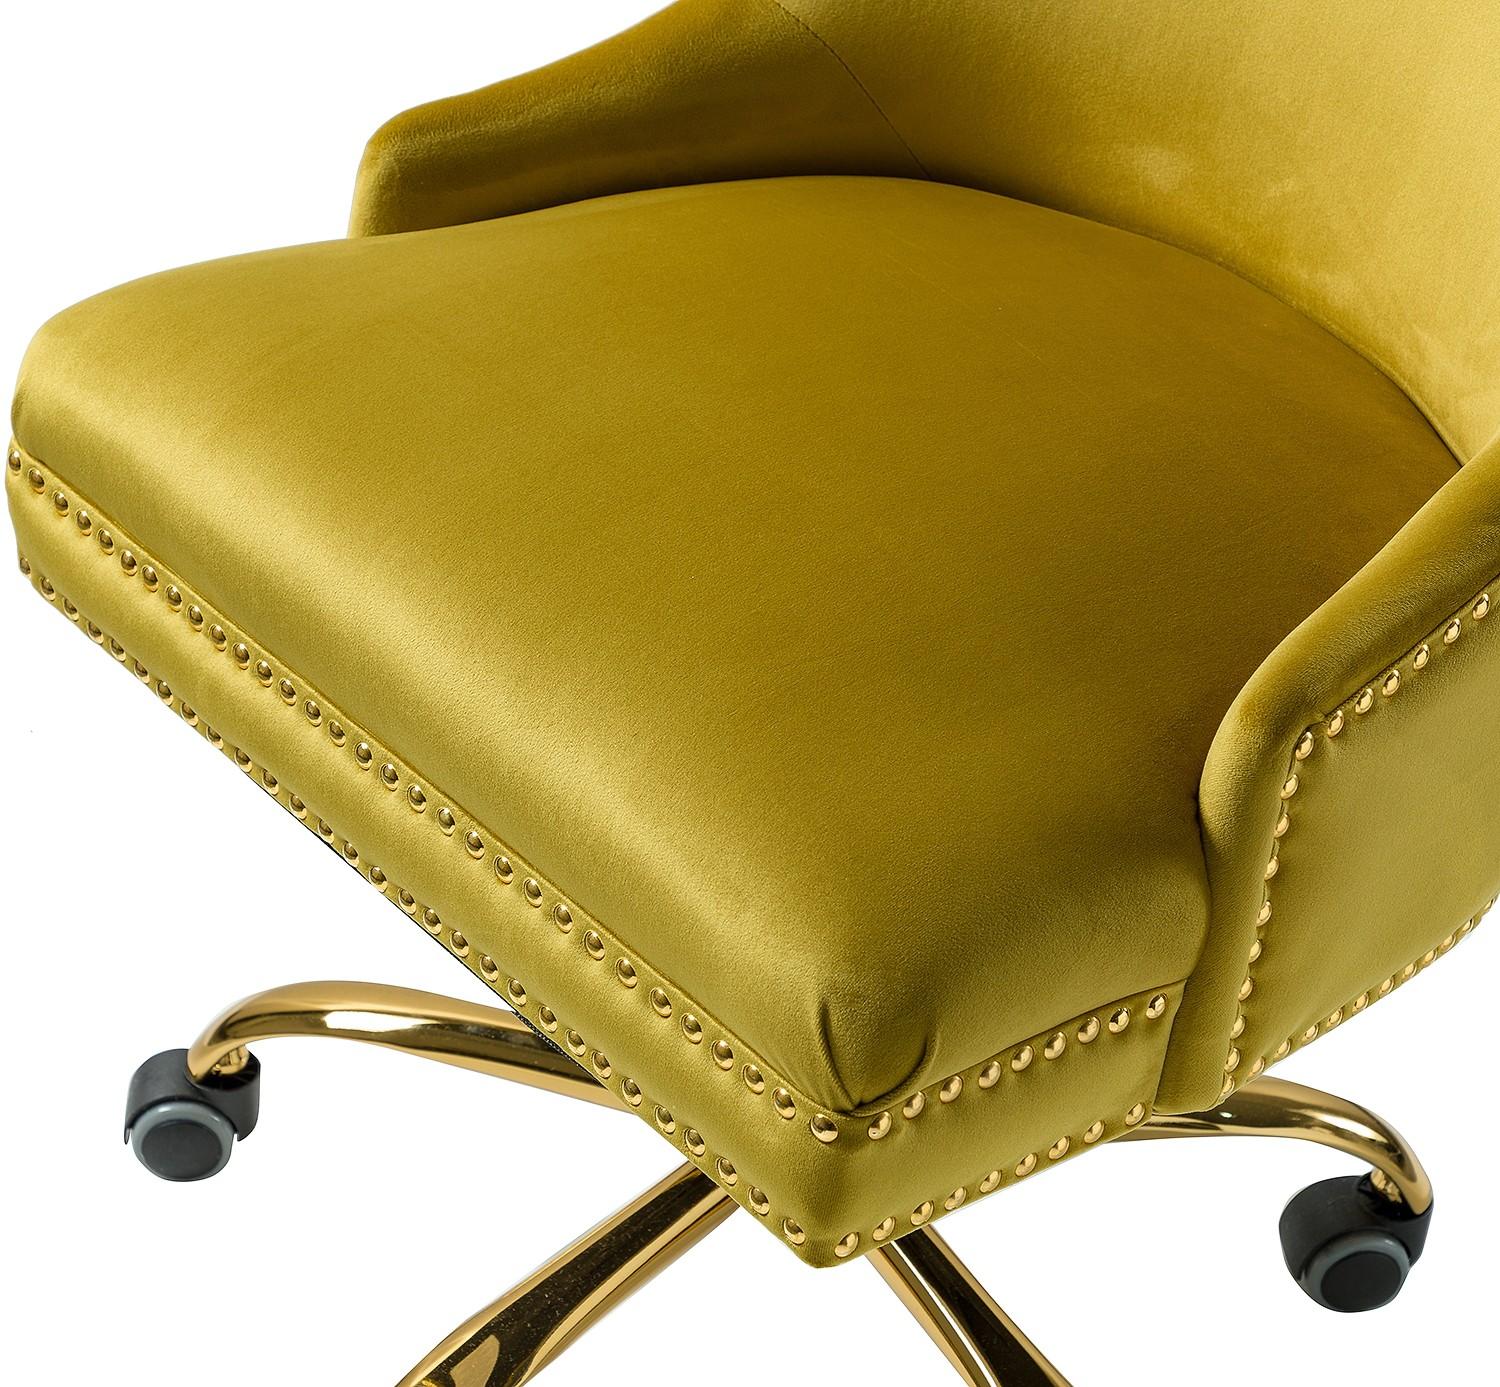 Handsome Mustard Nailhead Rolling Office Chair